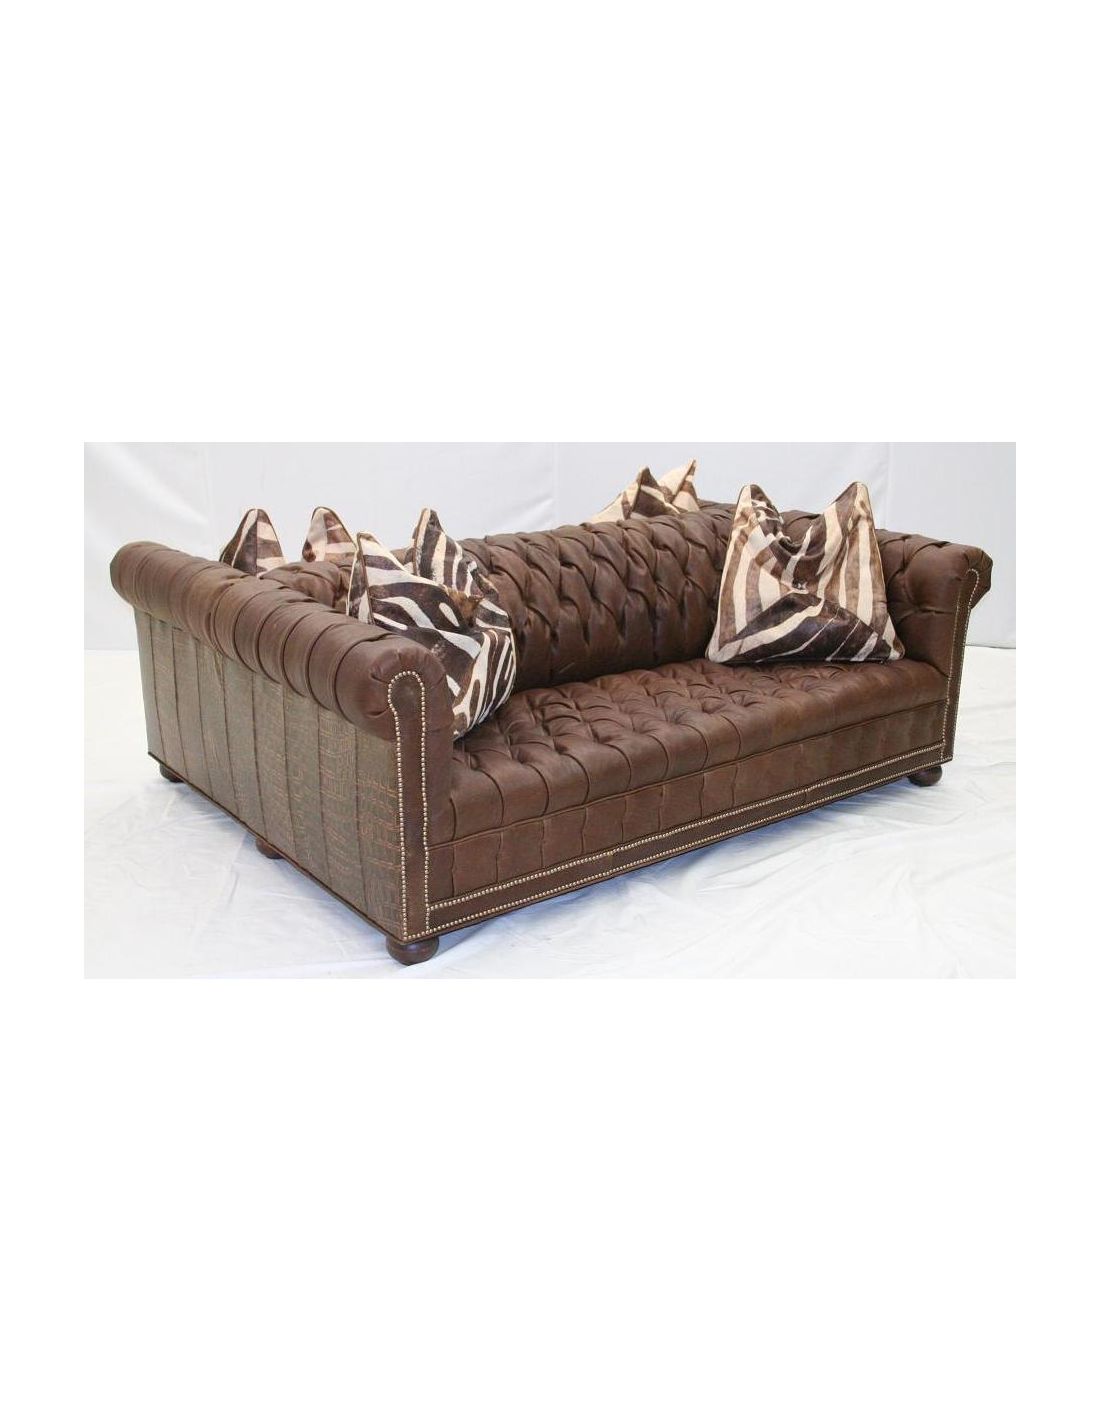 double sided tufted leather sofa high end furniture